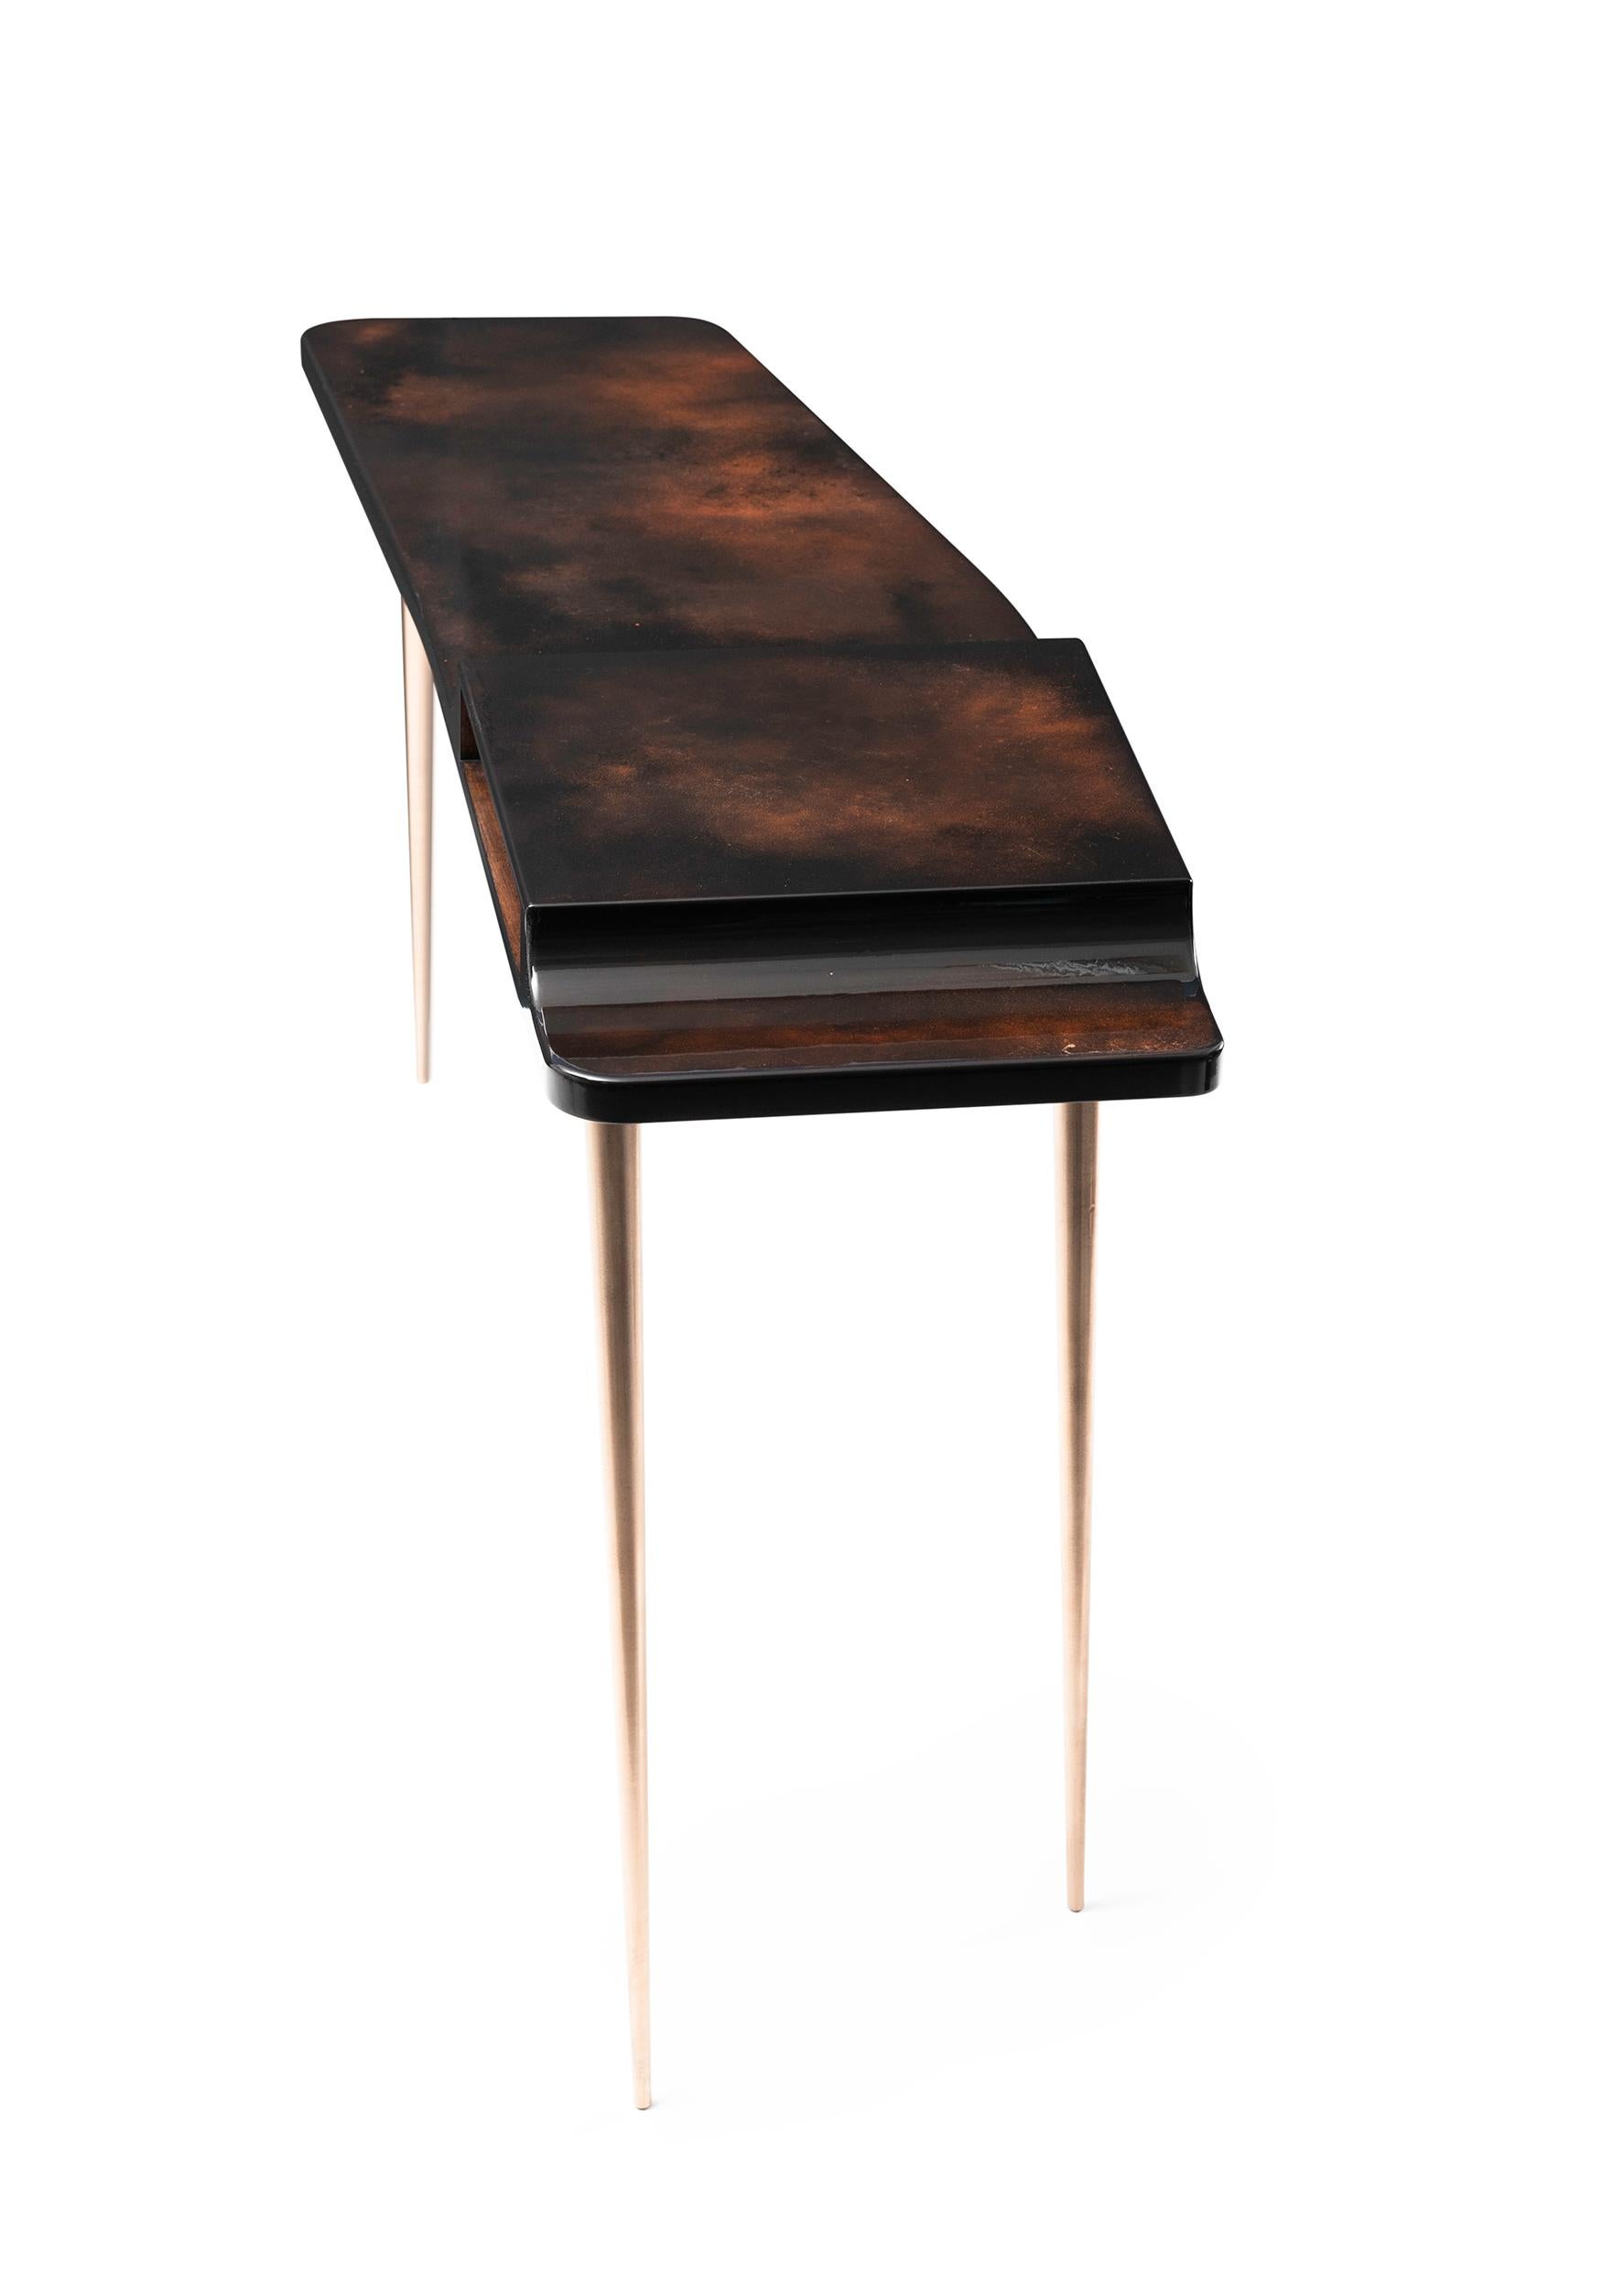 Messier 77 Console – 21st century modern luxury gold and copper desk console

Rich contemporary elegance embraced in the depth of materials of this freestanding console table is making much to carve its graceful Silhouette.

Opulent alliance of